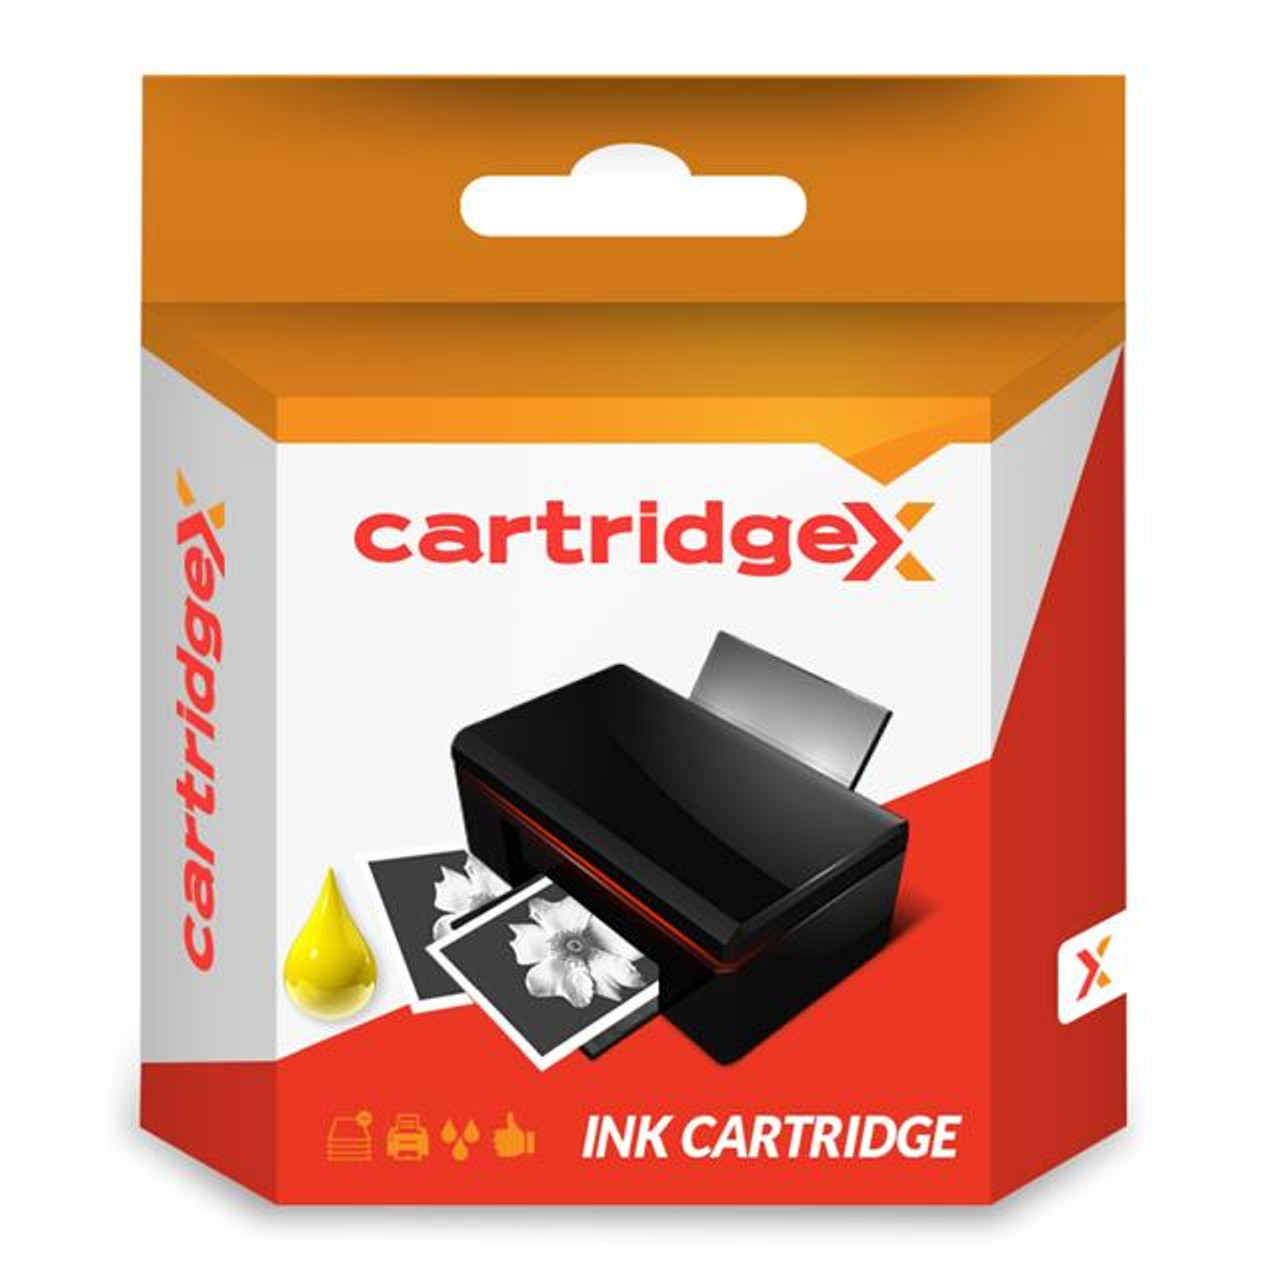 Compatible Yellow Ink Cartridge Compatible With Epson XP-615 XP-620 XP-625 XP-700 XP-510